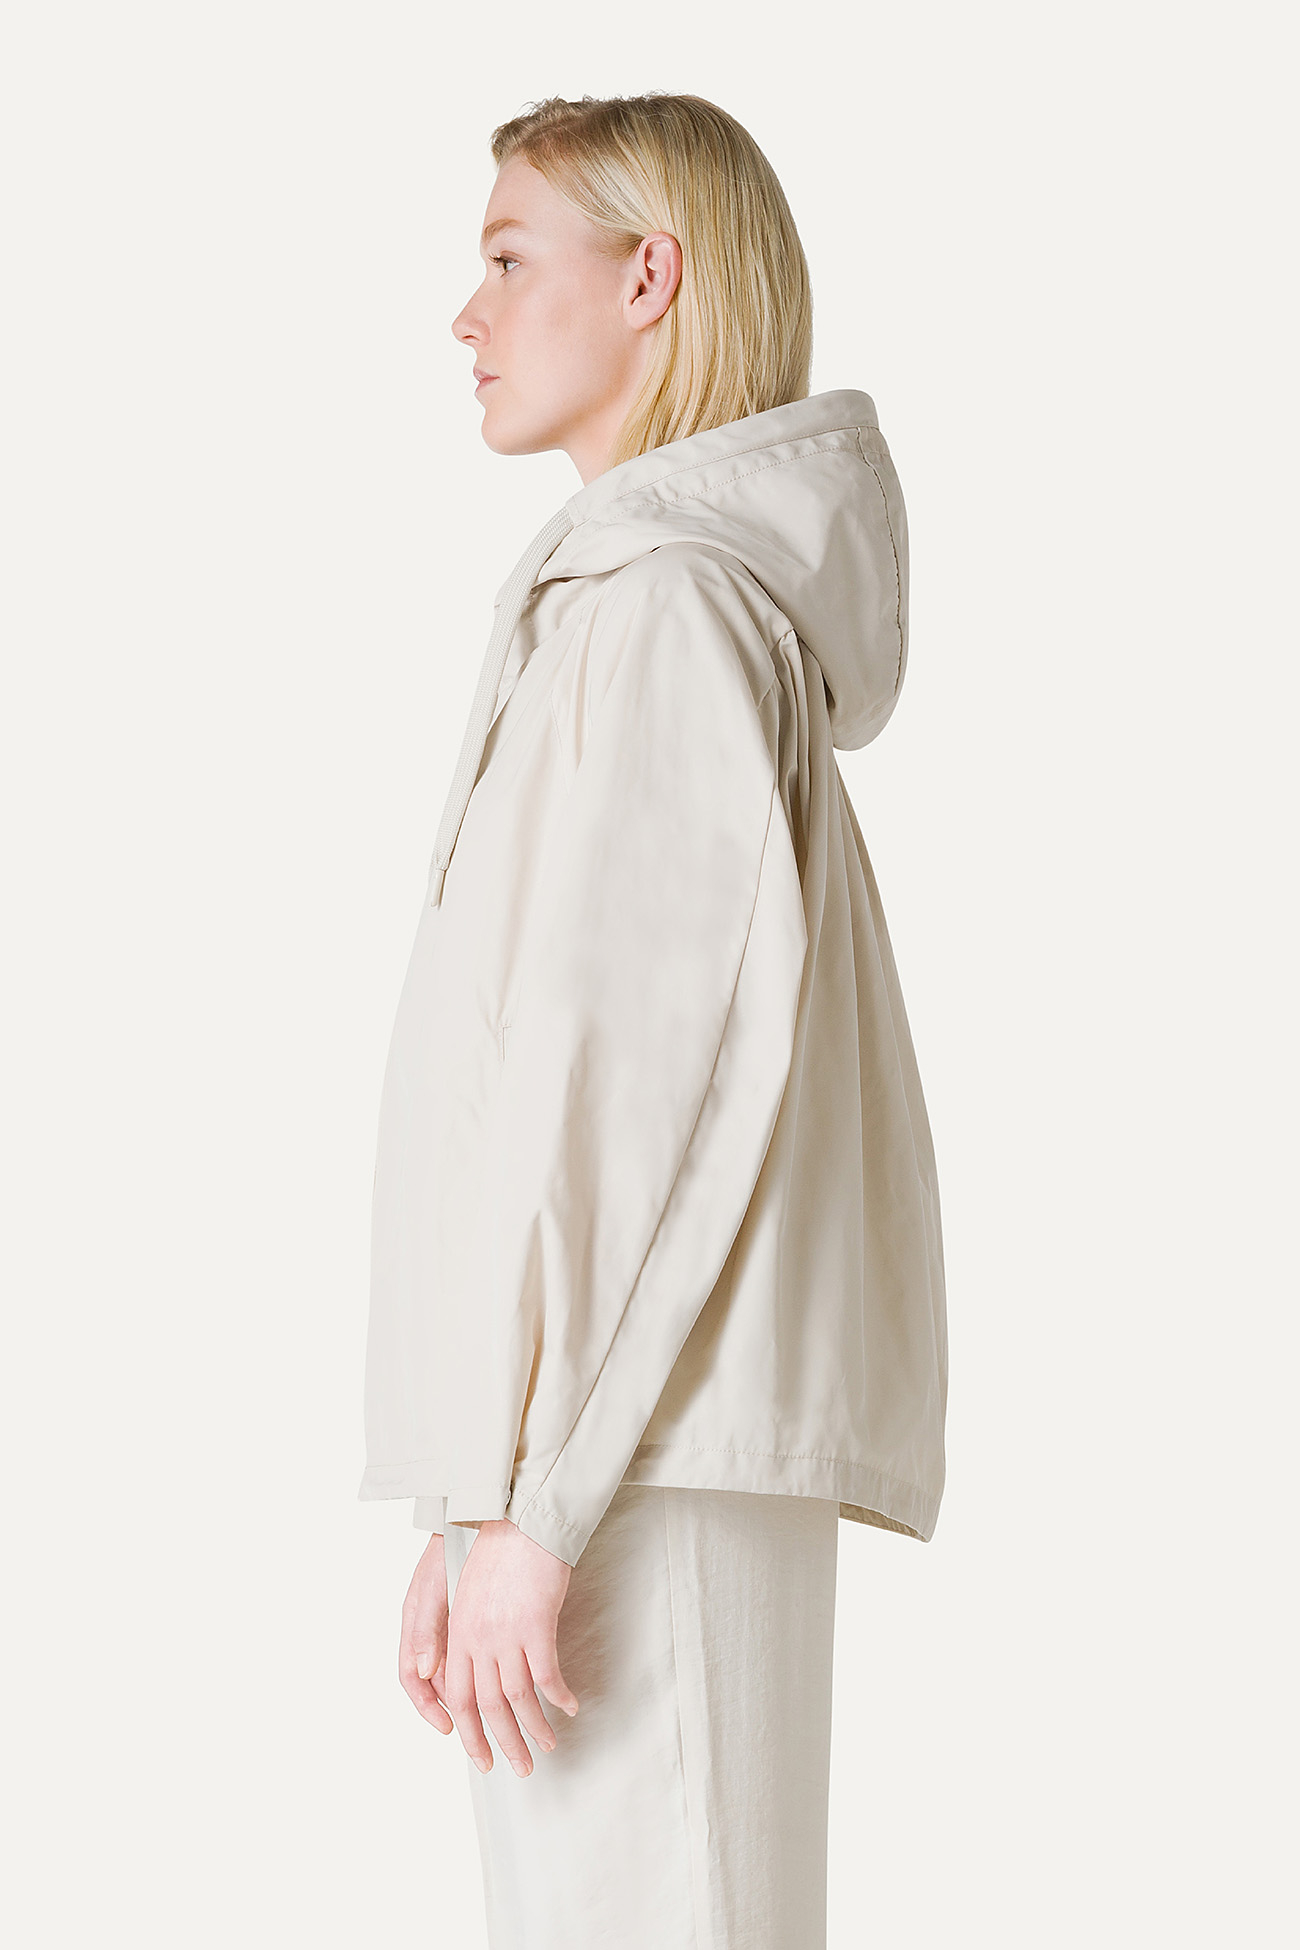 SHORT JACKET IN MEMORY NYLON WITH GATHERED BACK 9139 - CREAM - OOF WEAR